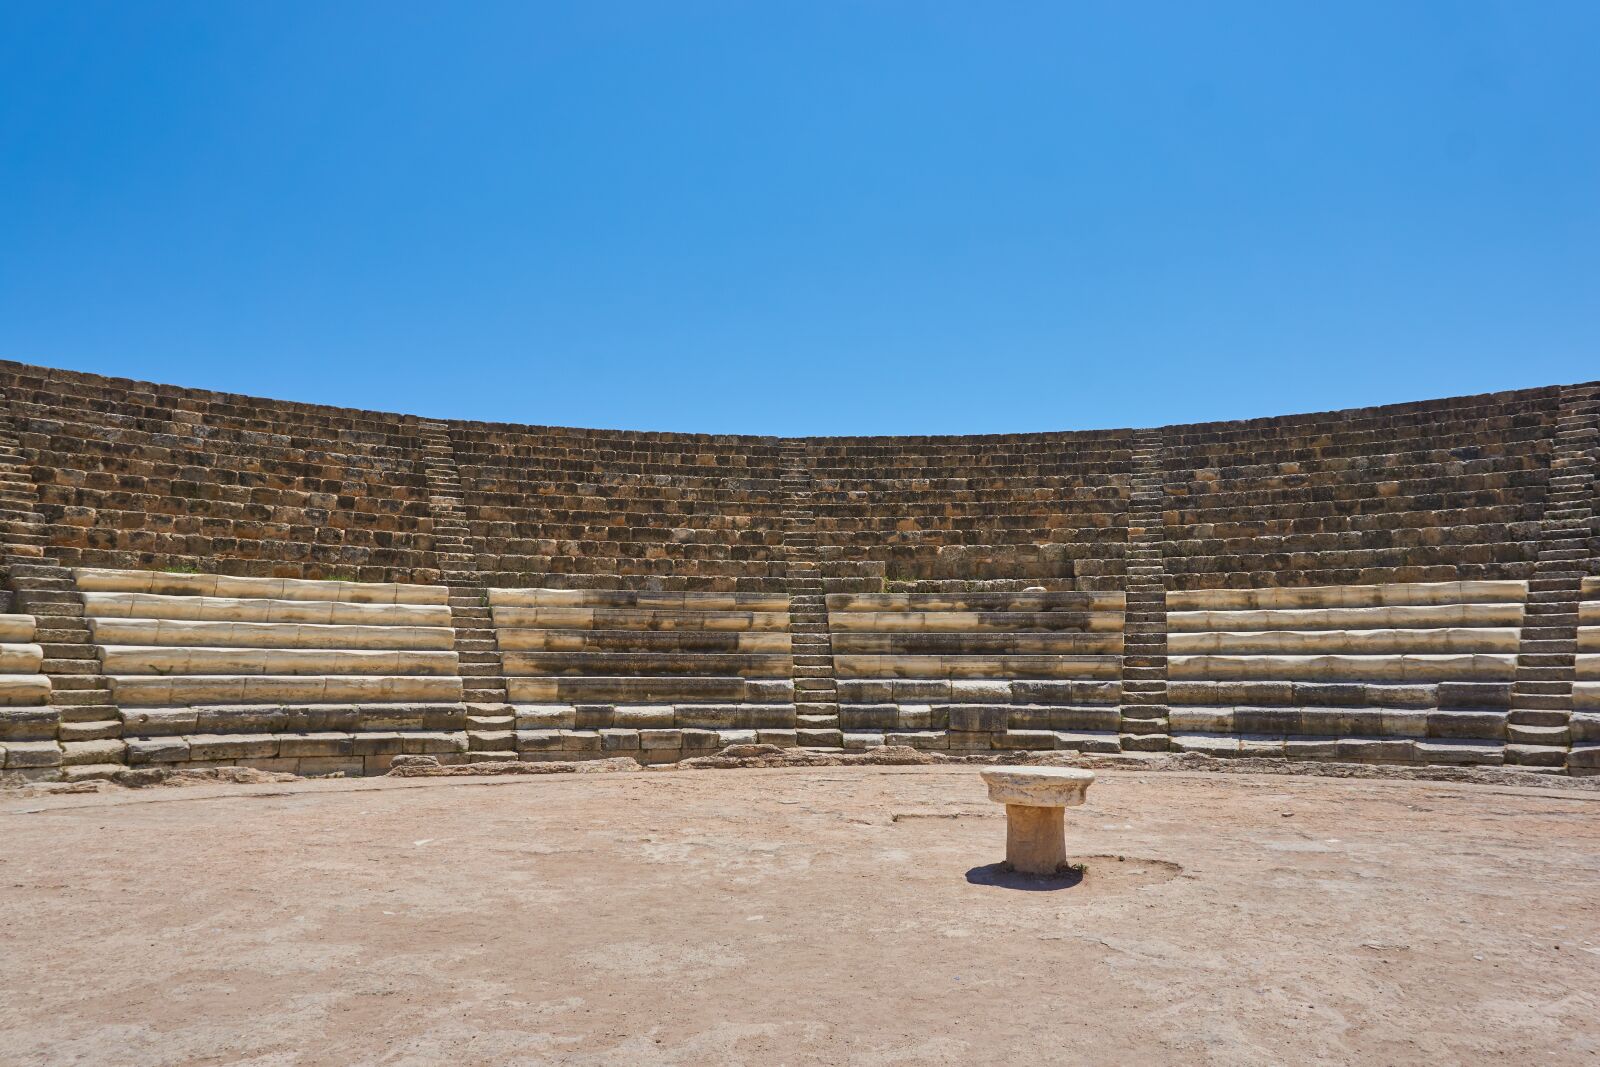 Sony a6000 + Sony E PZ 16-50 mm F3.5-5.6 OSS (SELP1650) sample photo. Cyprus, amphitheater, old photography